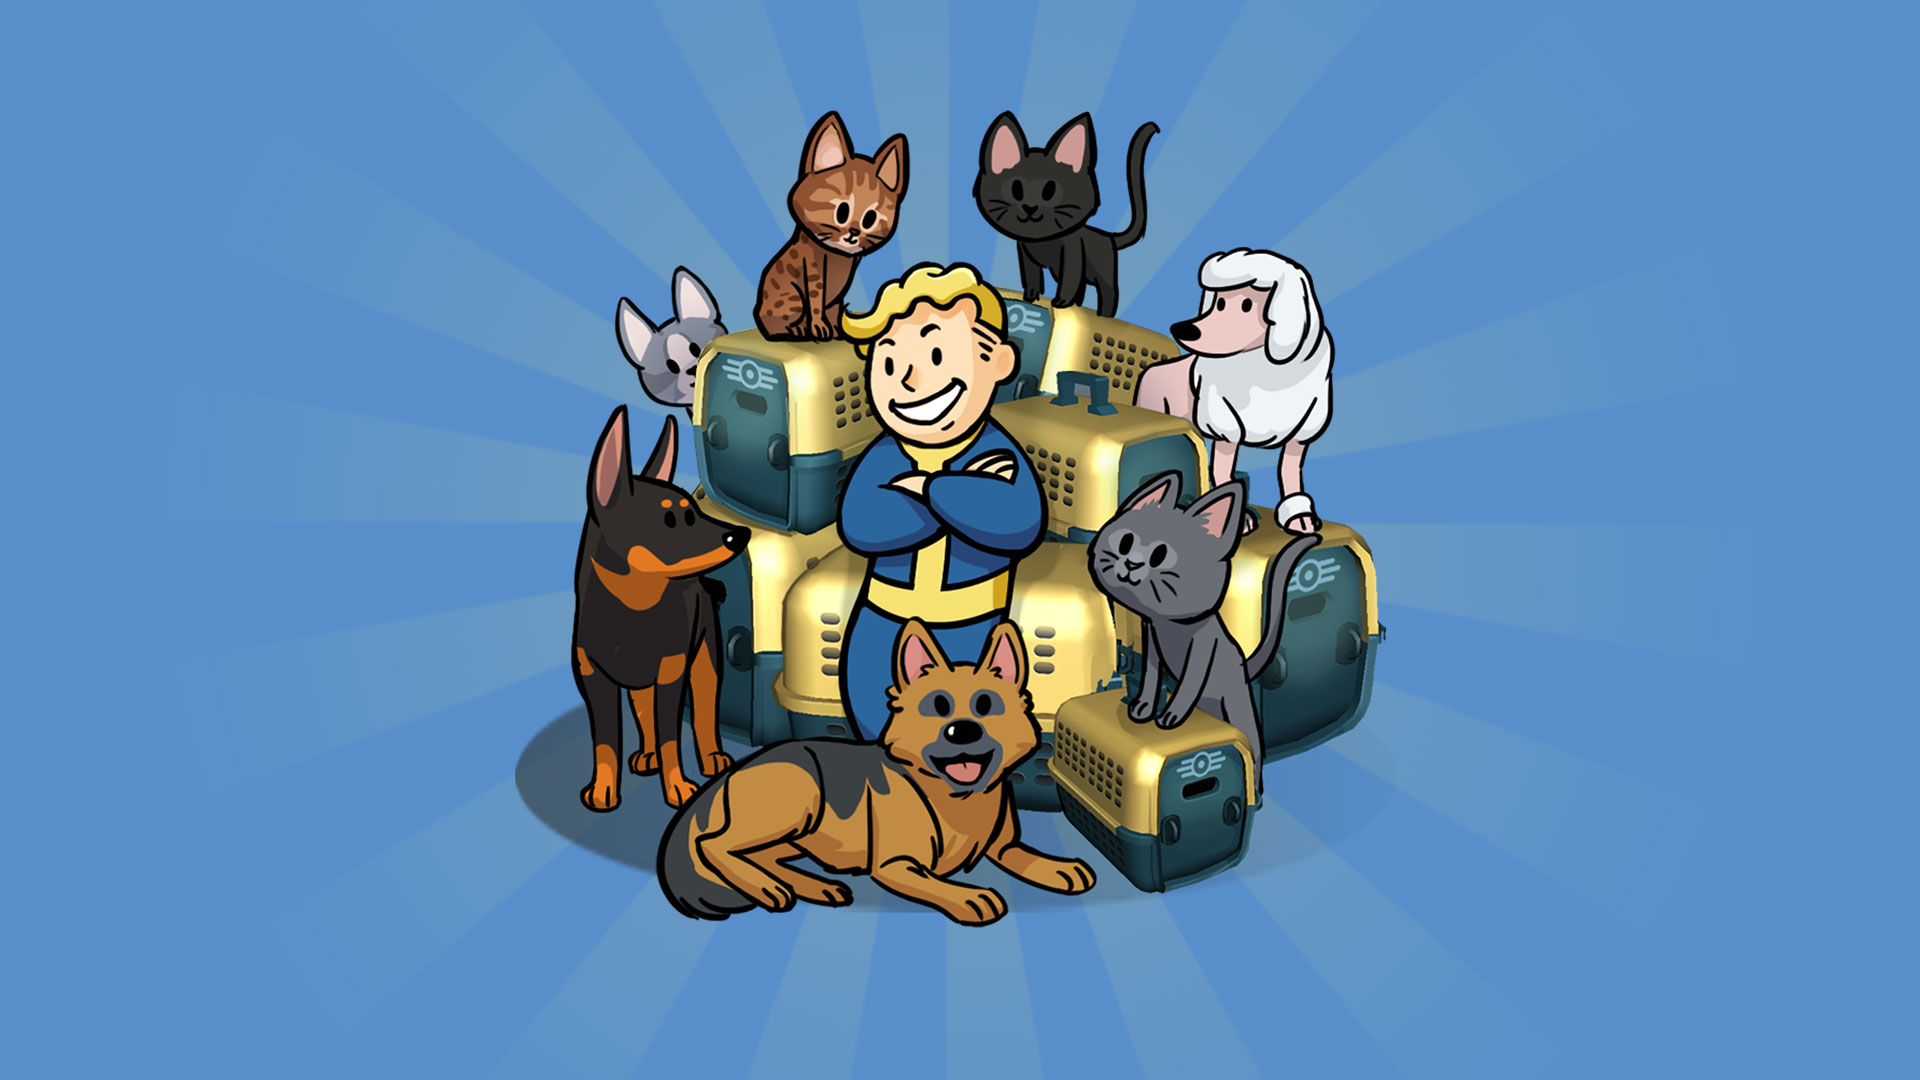 sell fallout shelter pets?